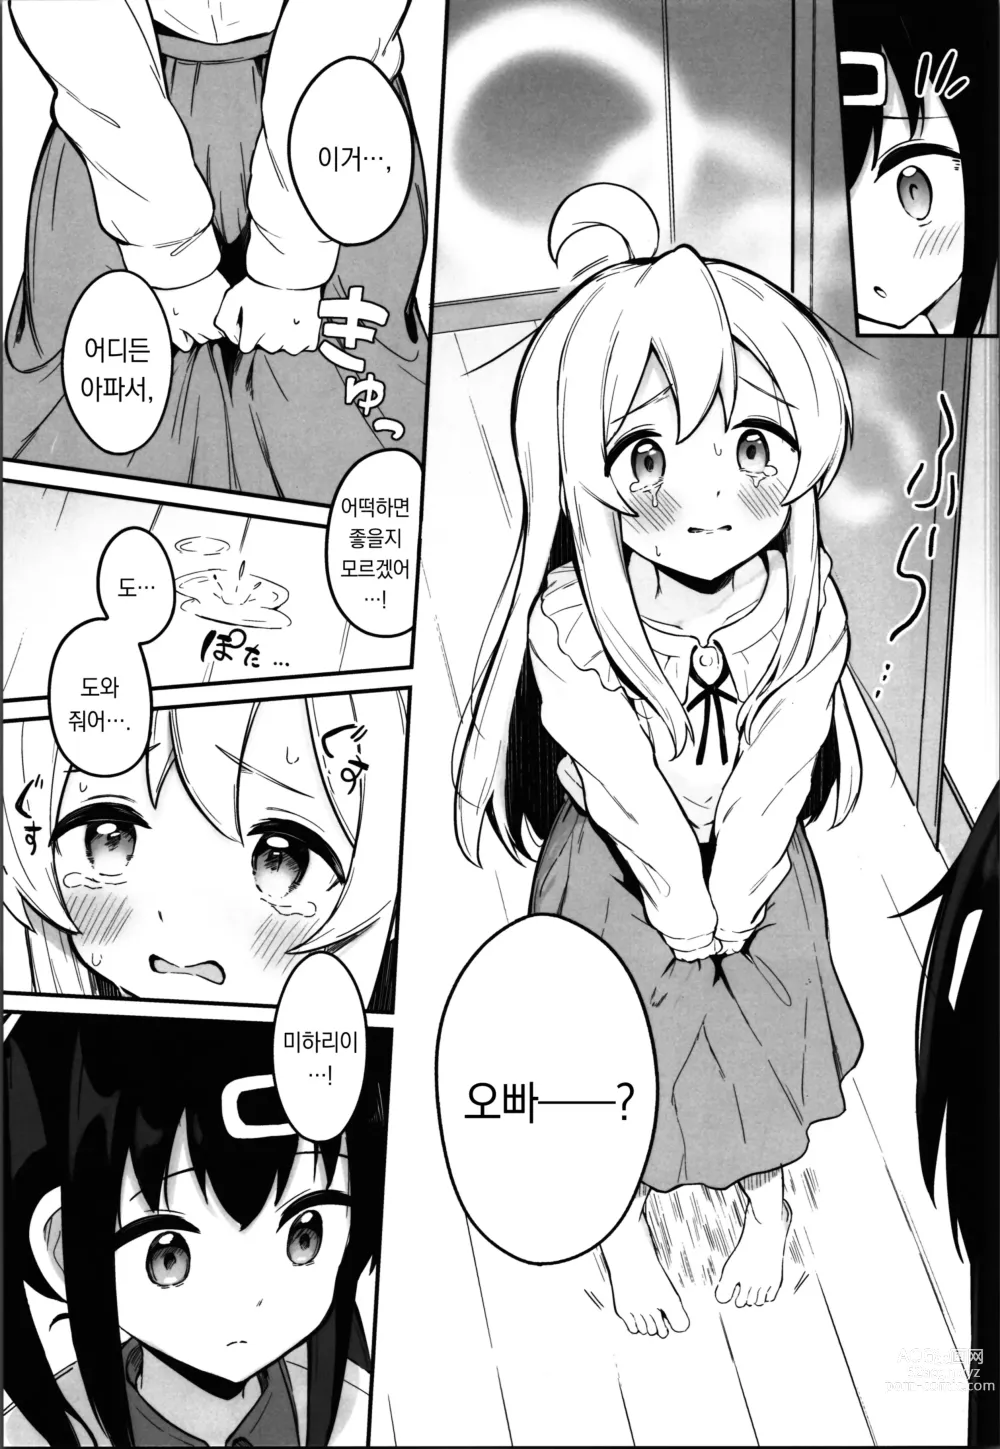 Page 13 of doujinshi 역시 오빠야!